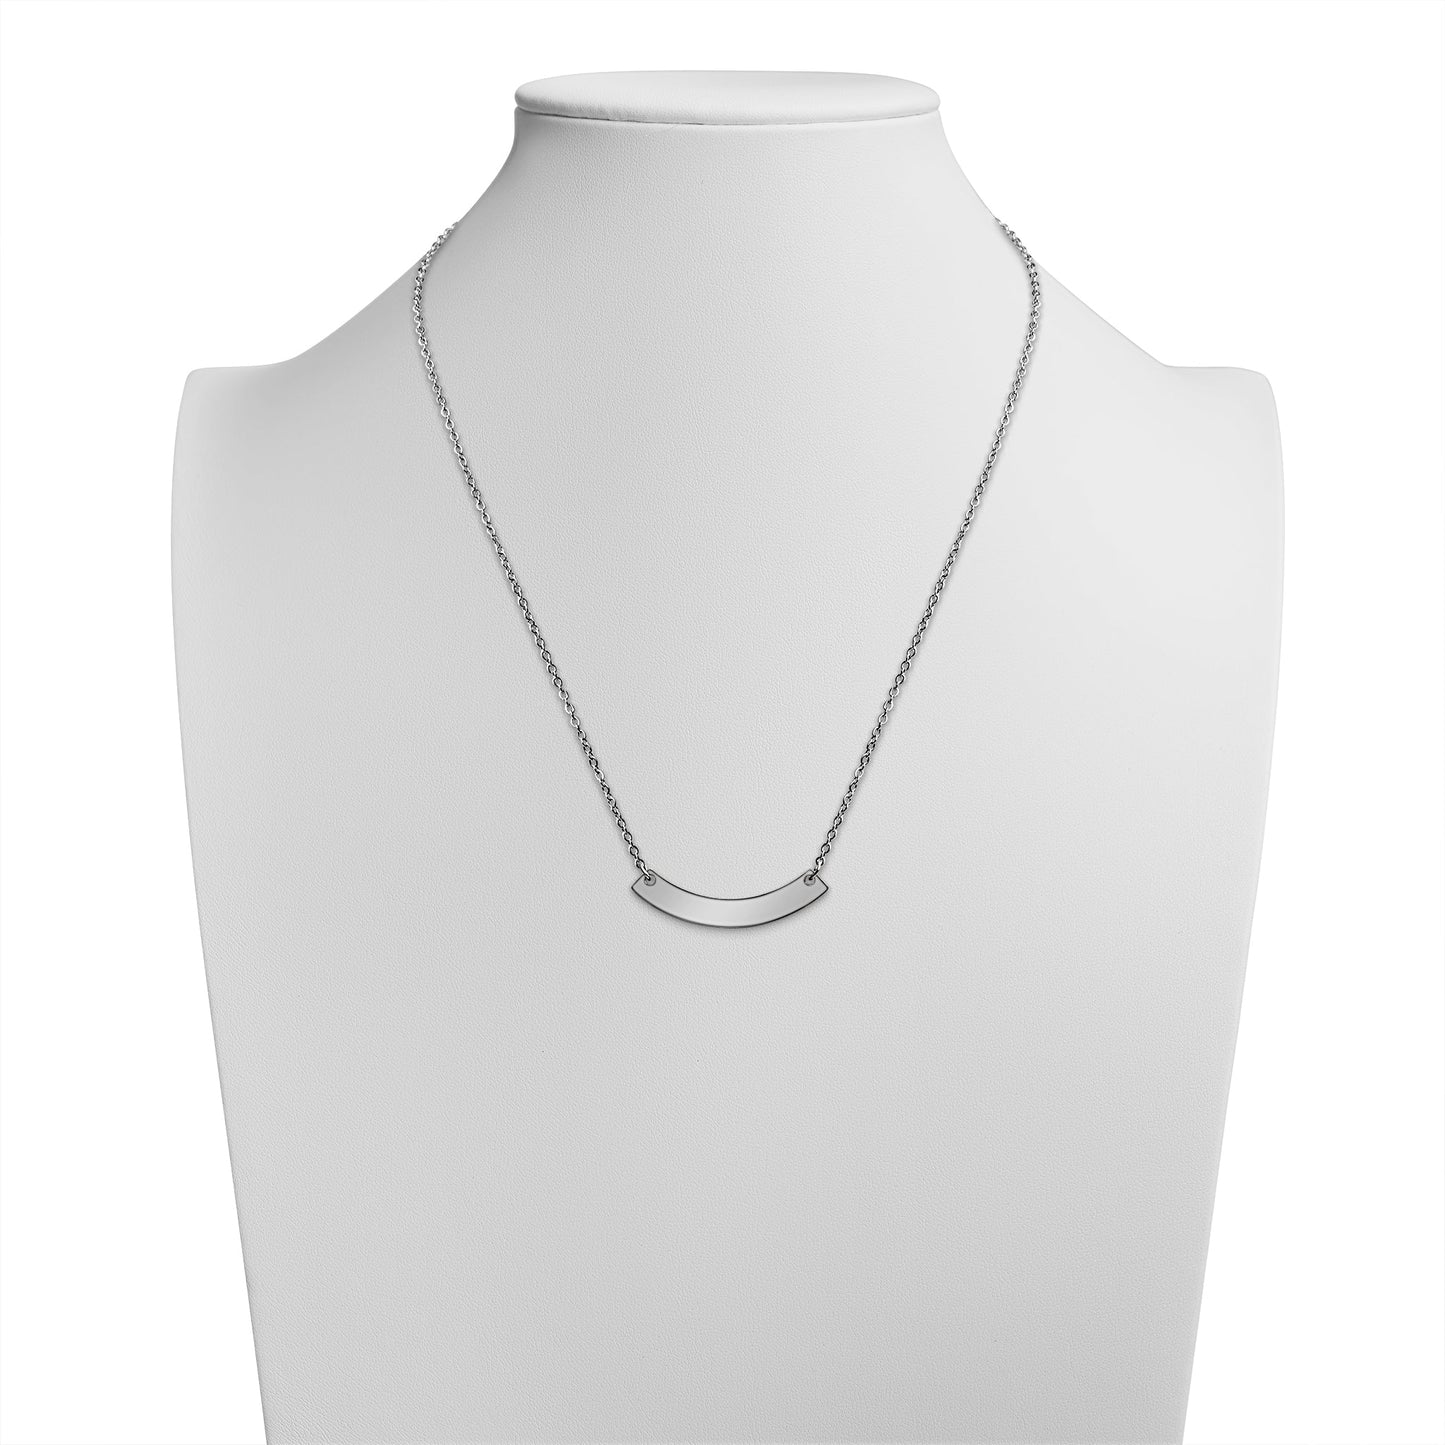 Blank Curve Bar Stainless Steel Necklace / SBB0049